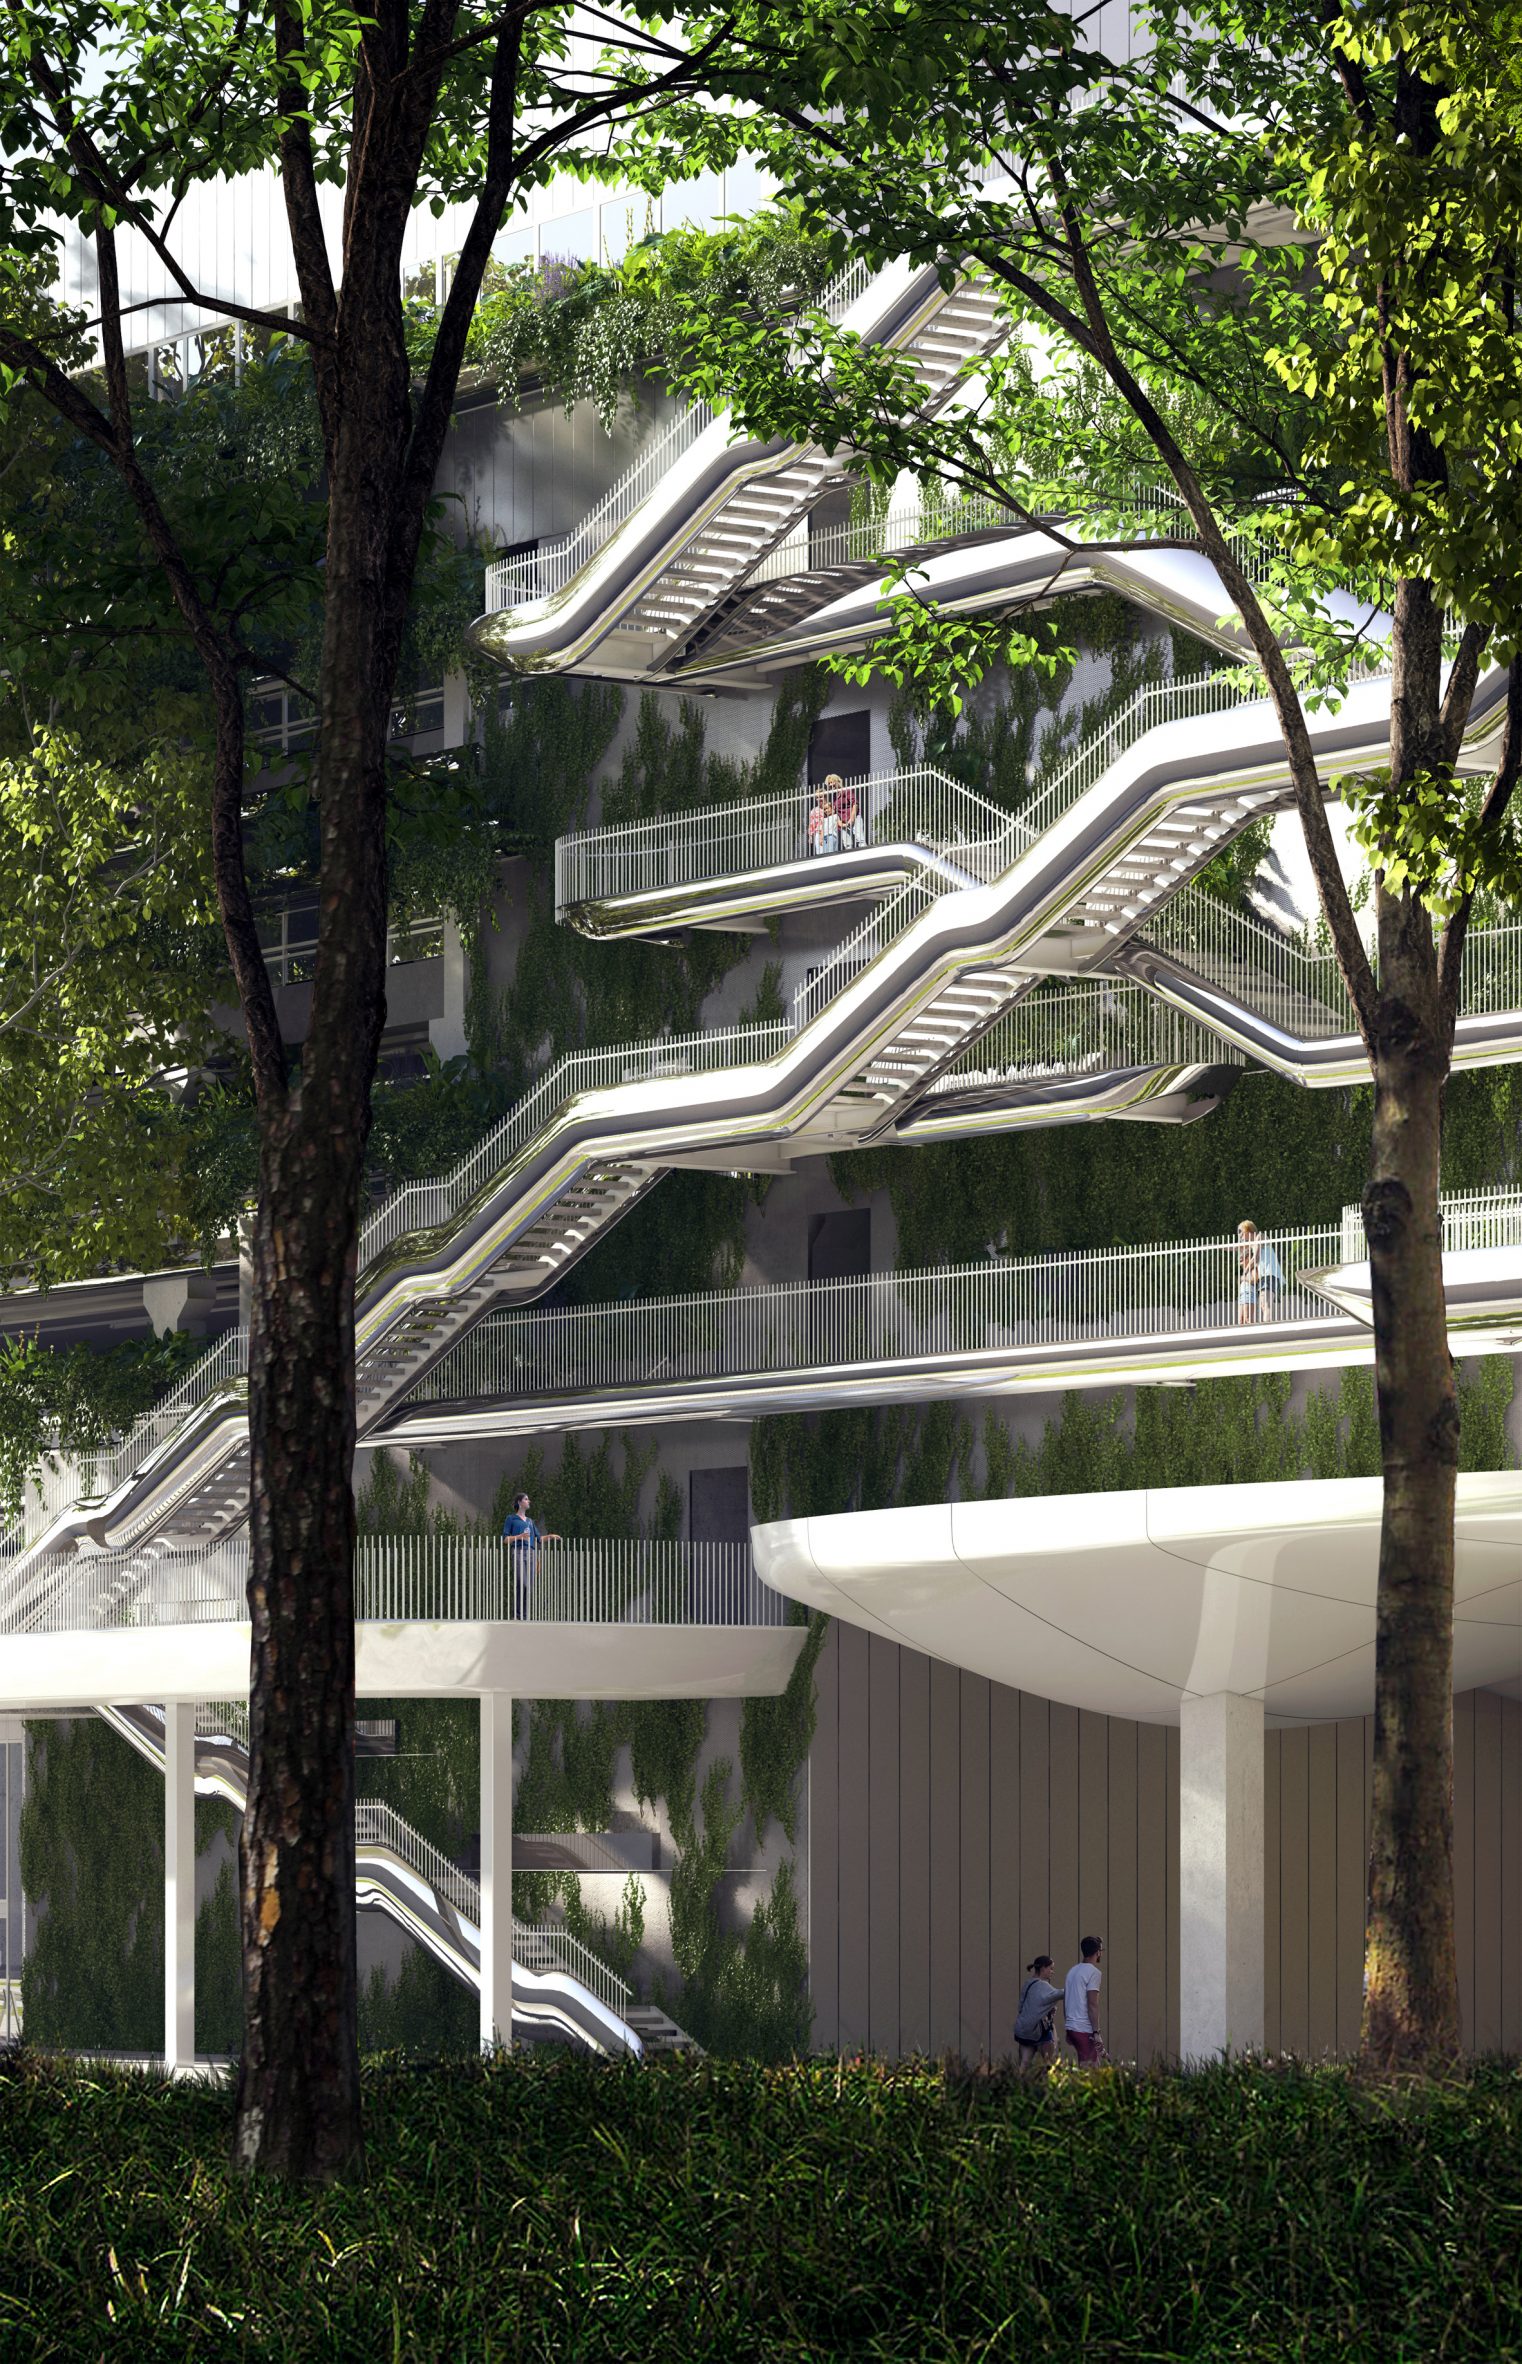 Criss-crossing staircases designed by MAD